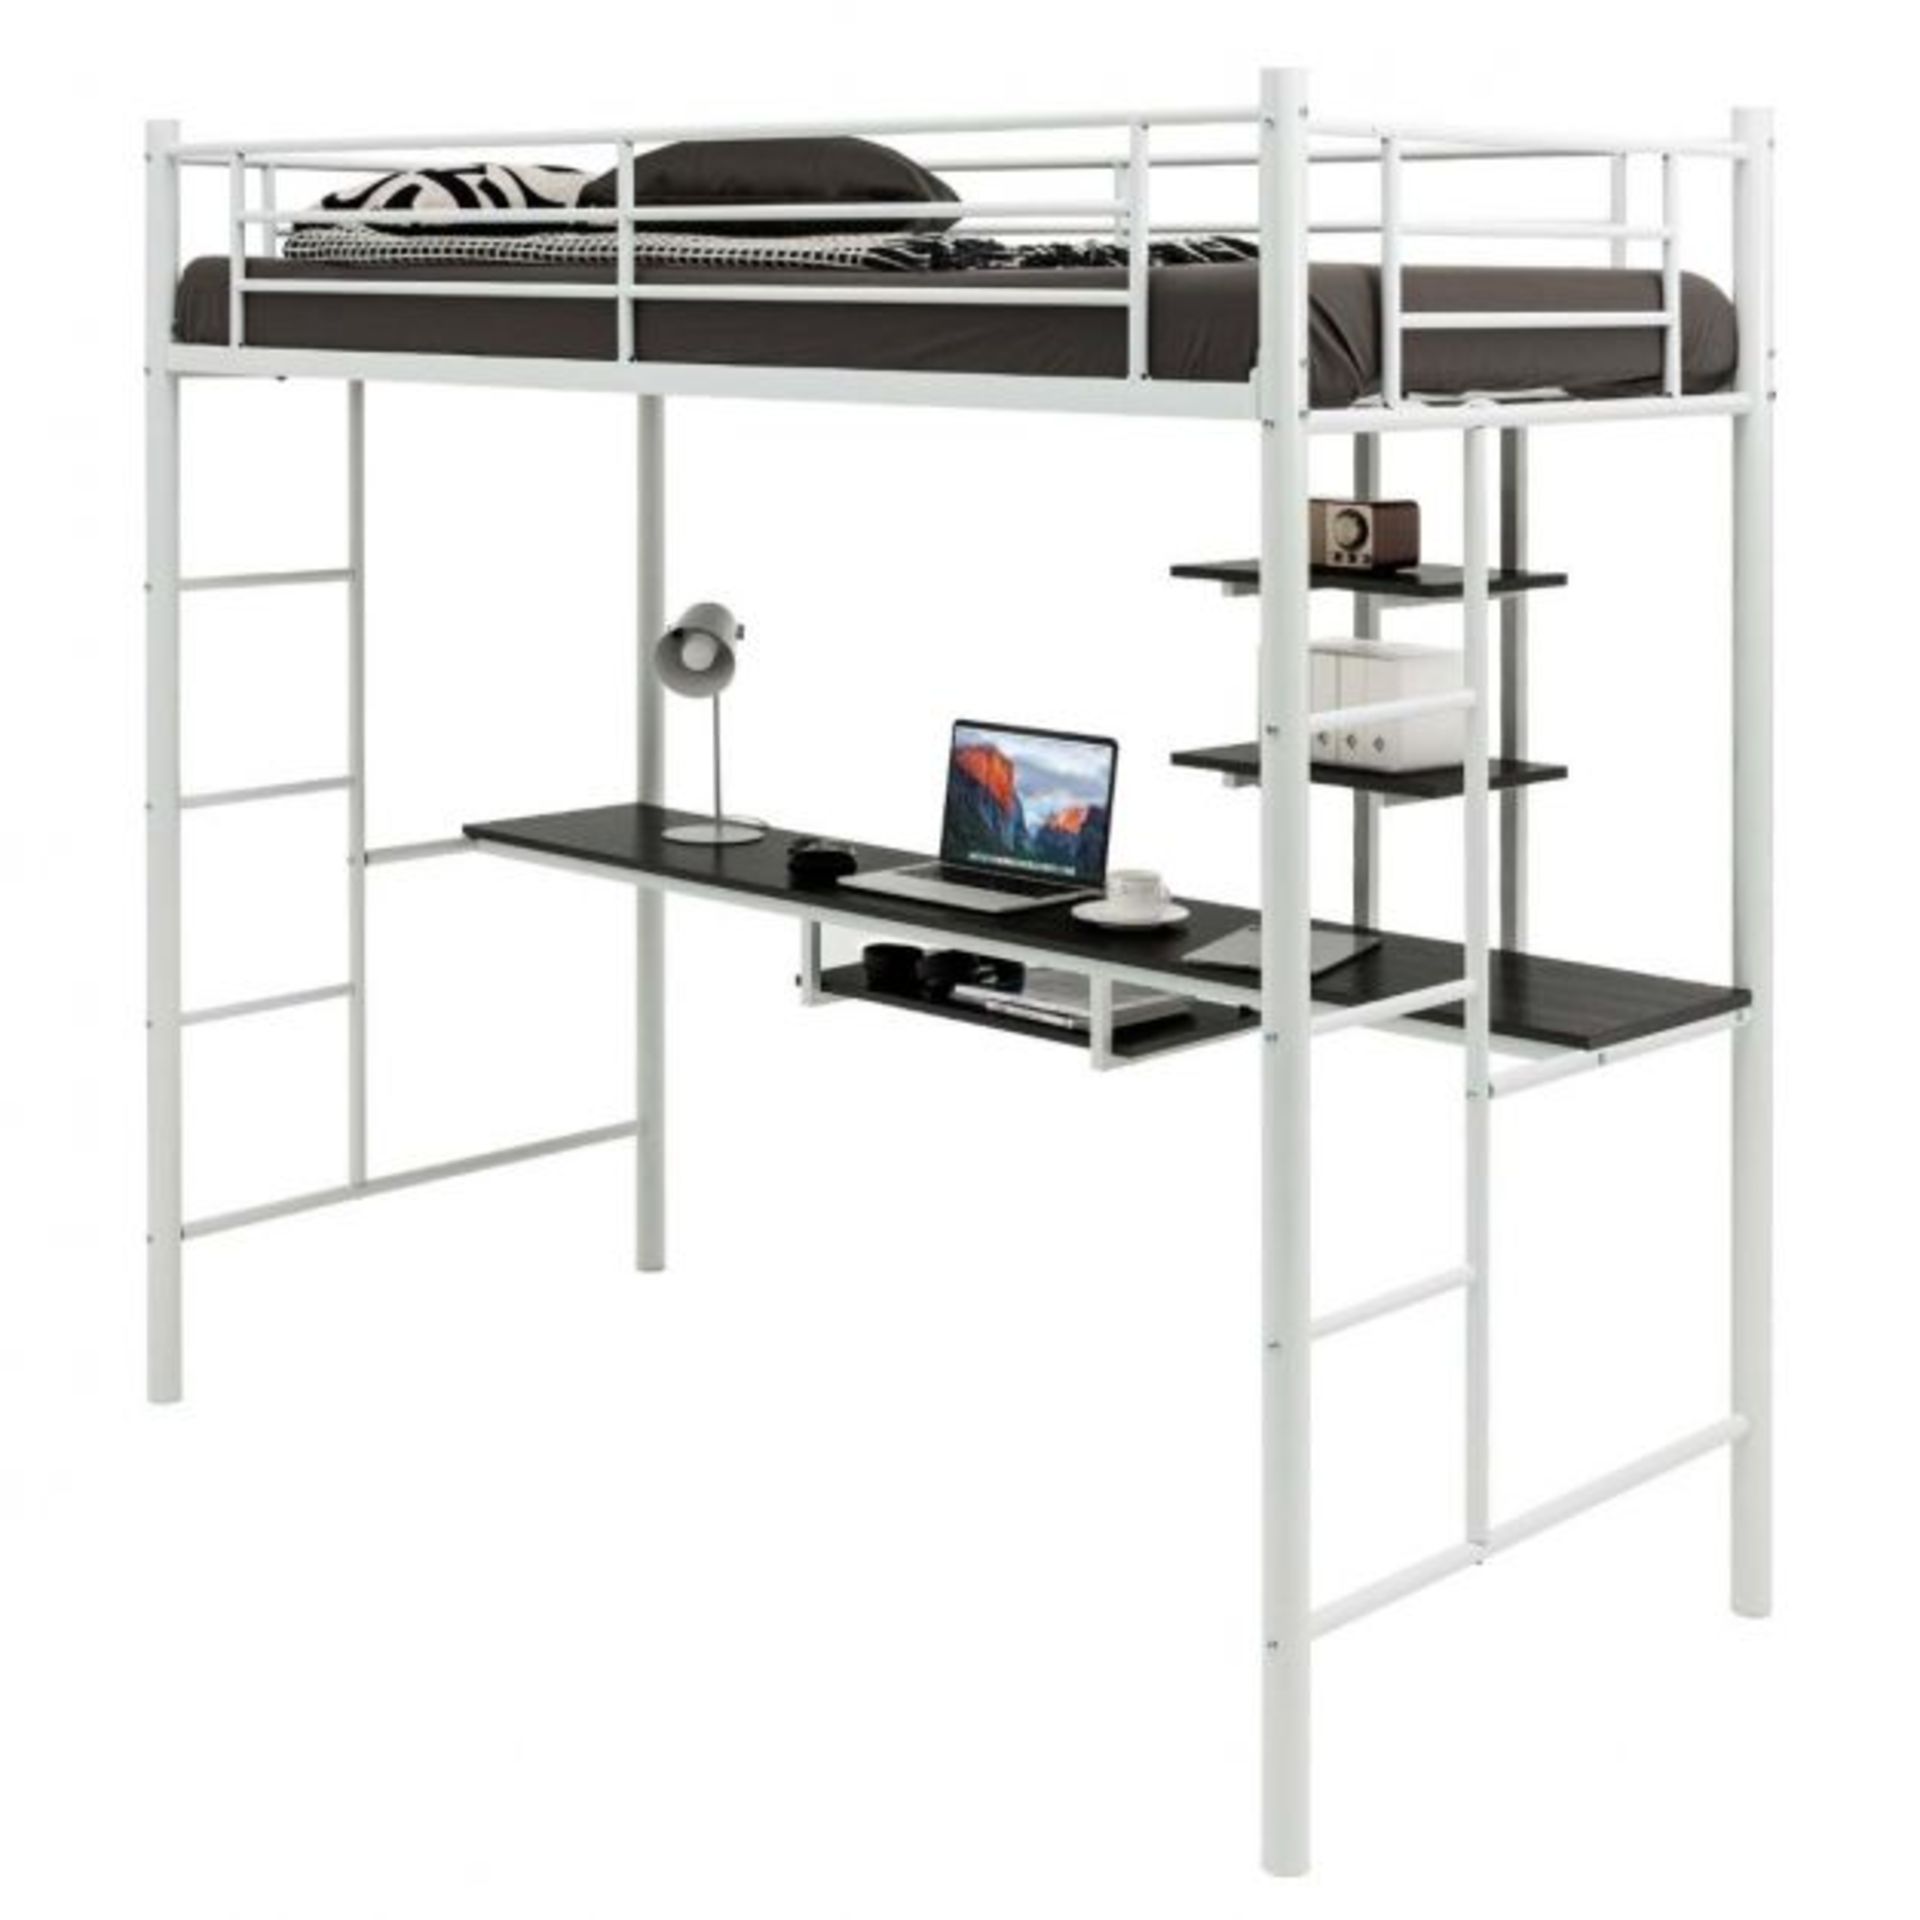 Metal Bunk Bed Frame High Sleeper with Desk and Storage Shelves. - SR37. Made of powder-coated